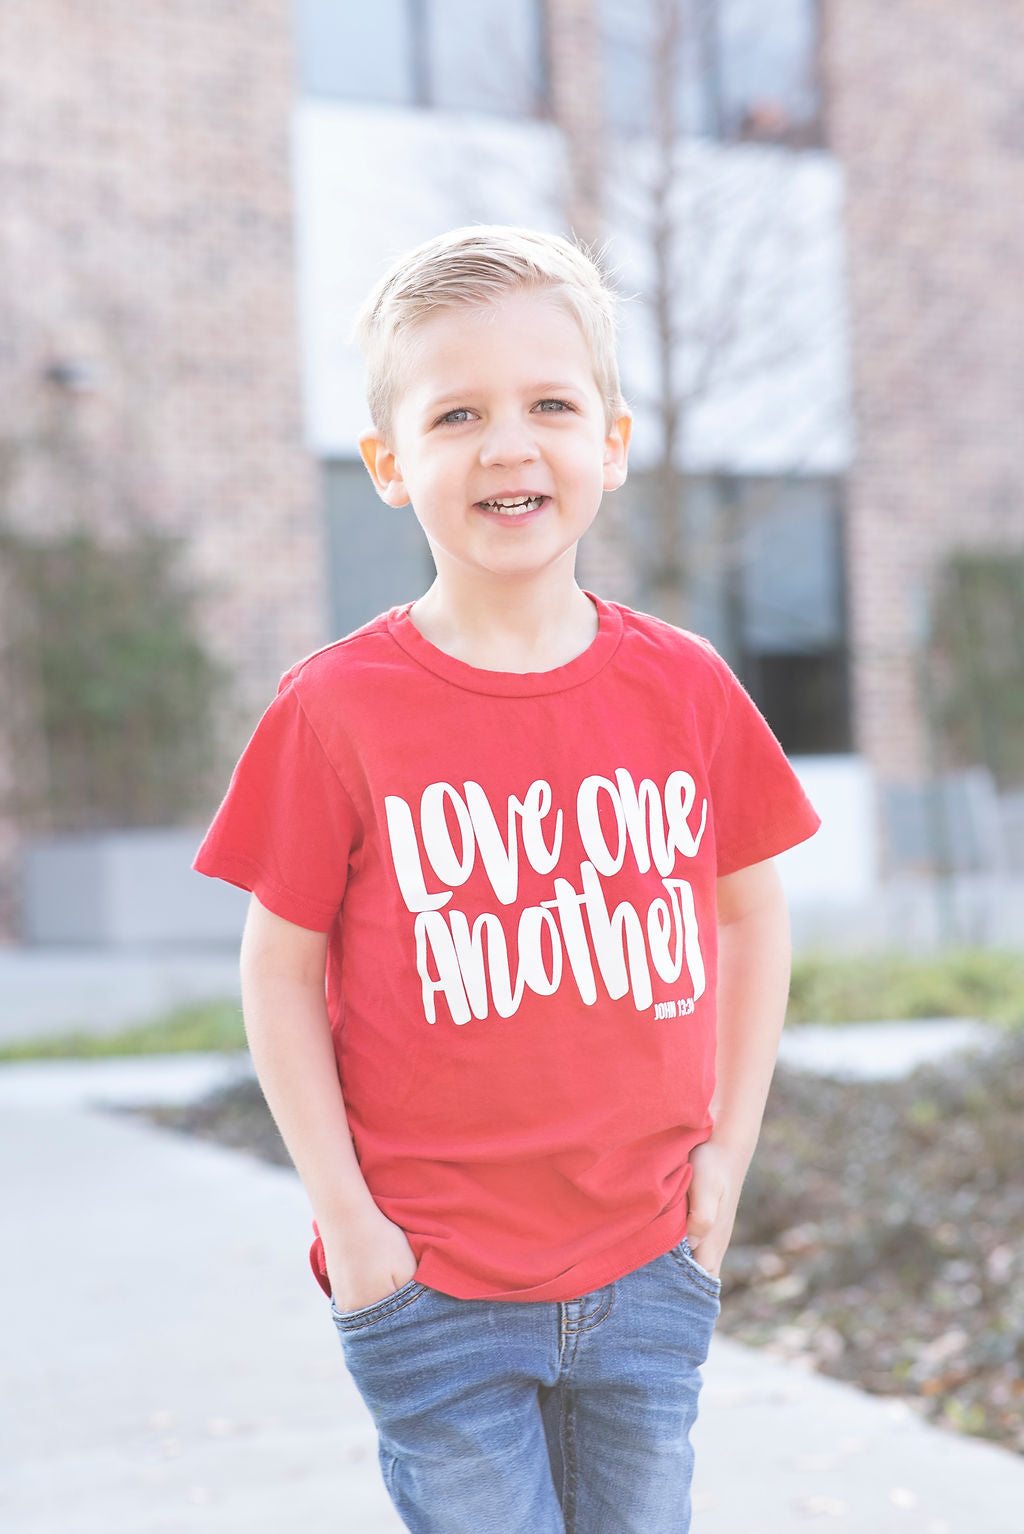 Love One Another Tee – His Kids Company